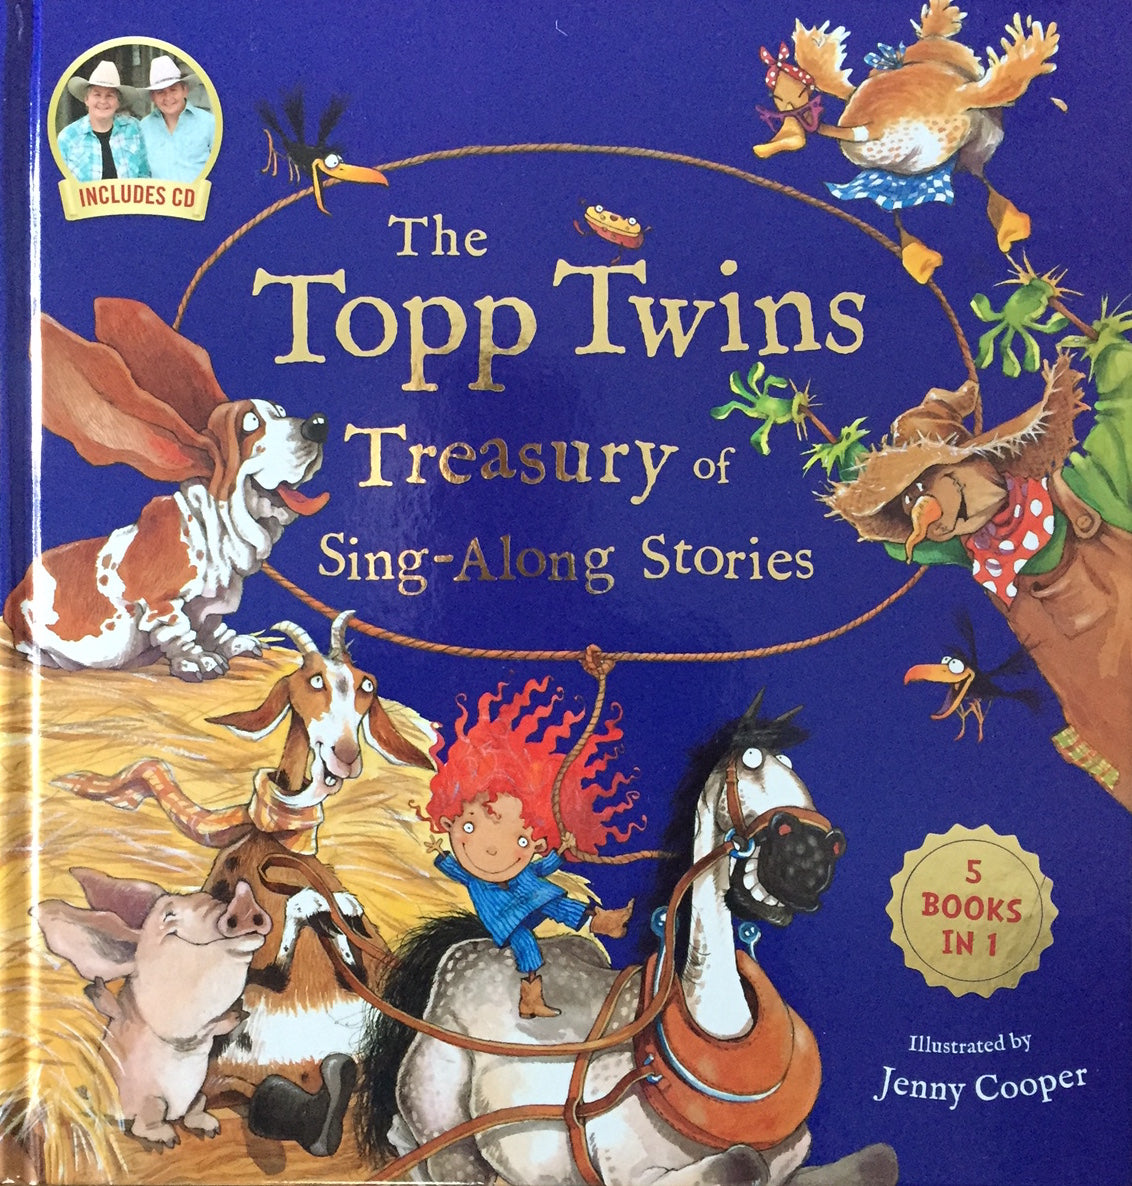 The Treasury Of Sing-Along Stories